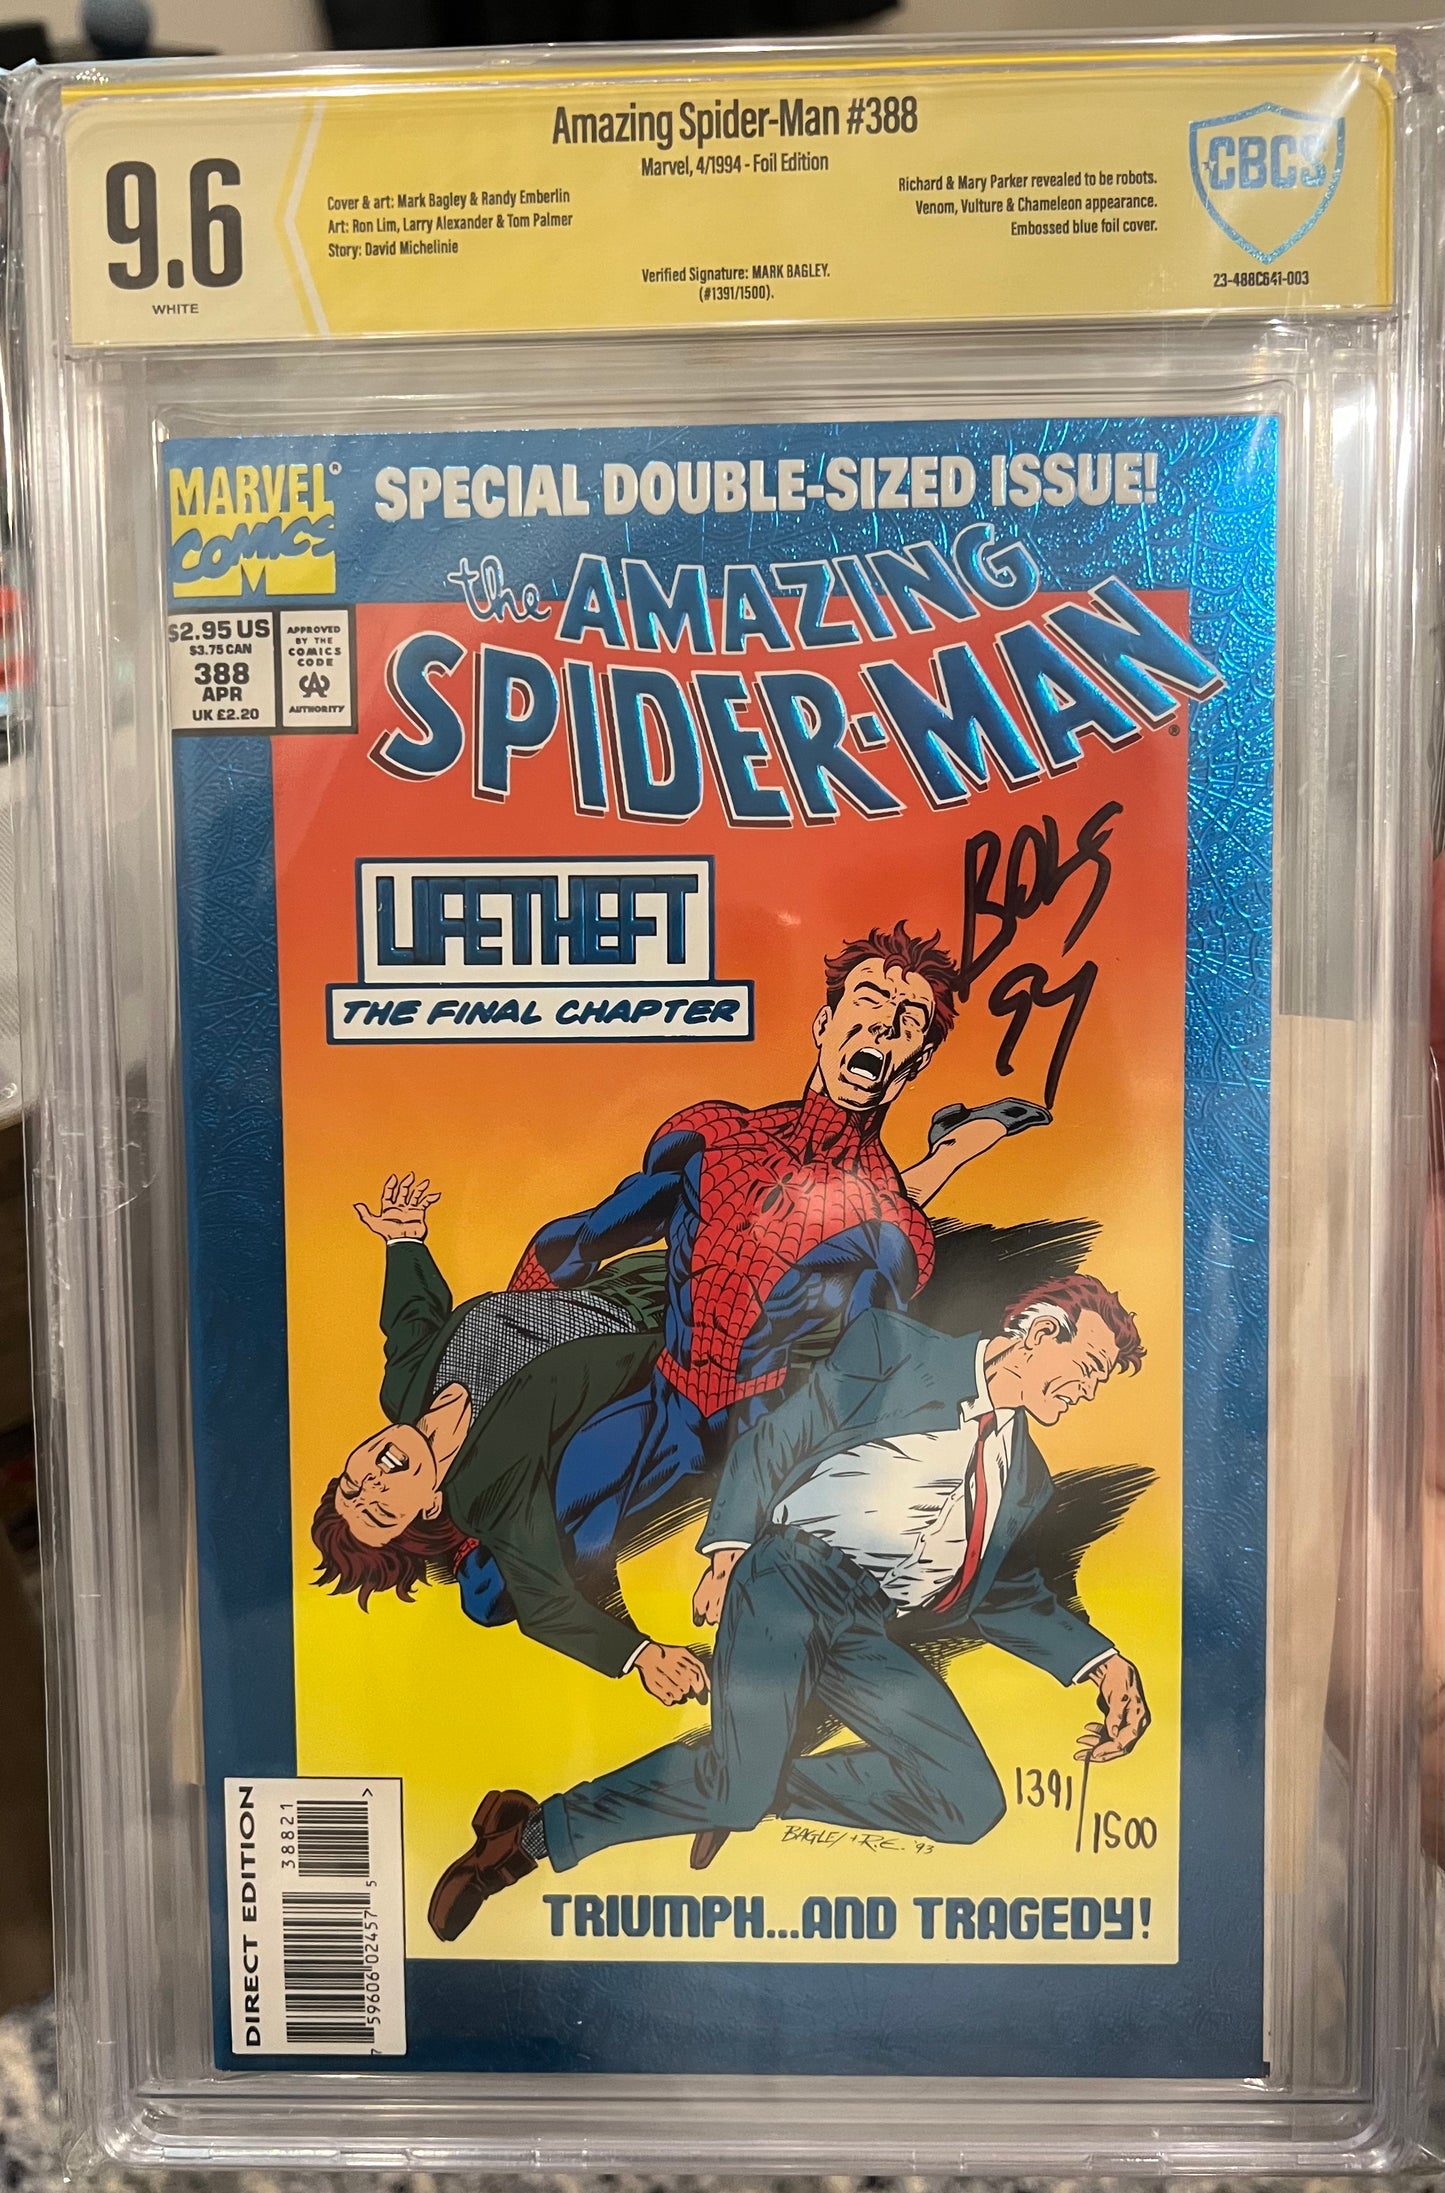 Amazing Spider-Man #388 CBCS 9.6 (Marvel, 1st Series) Verified Signature from Mark Bagley w/COA